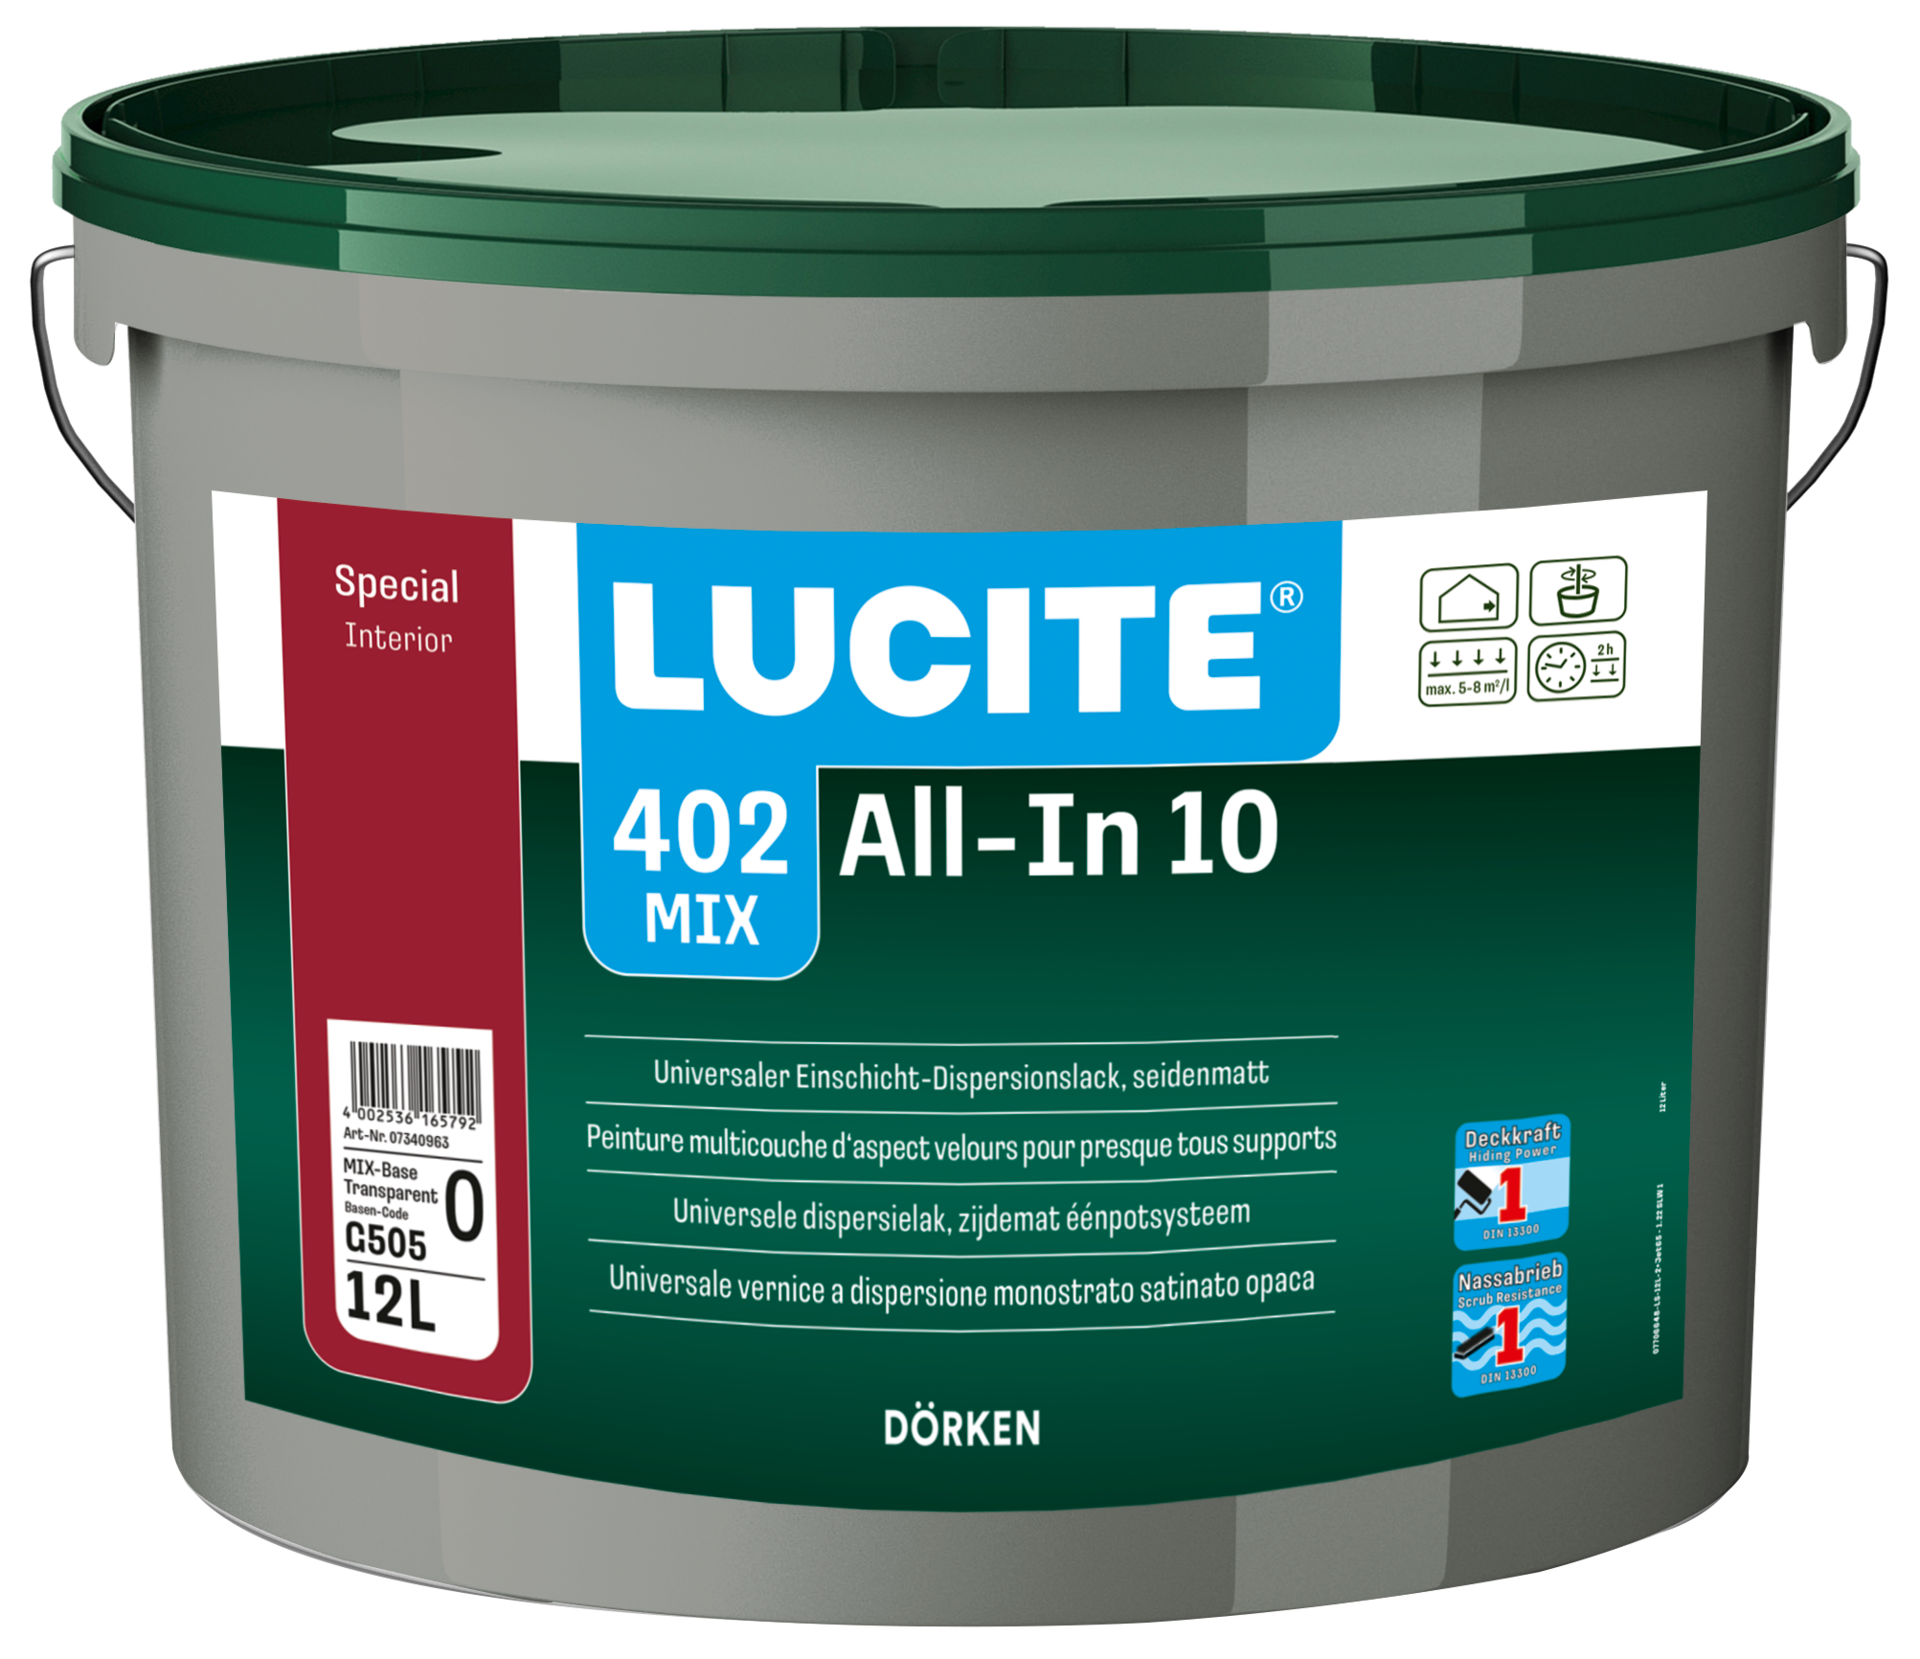 LUCITE® 402 All-In 10